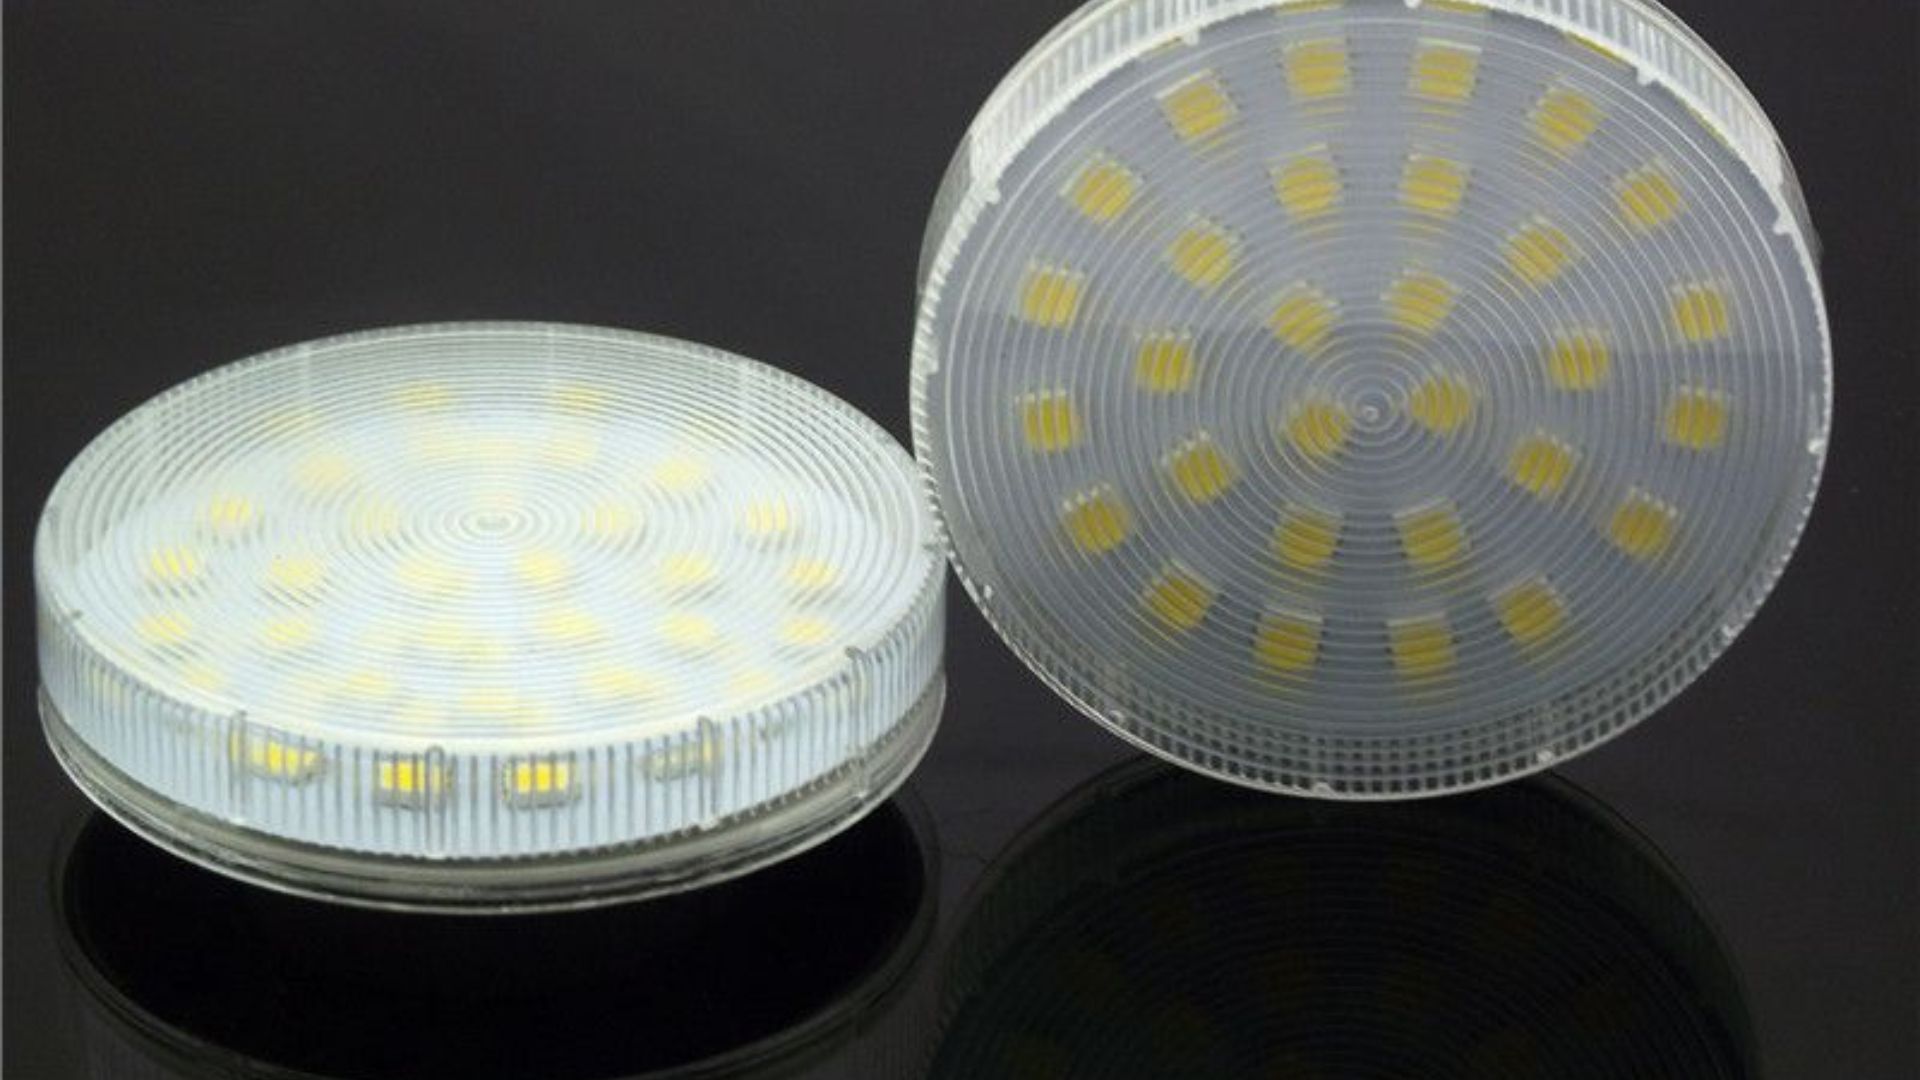 10 Things to Look for in LED Light Suppliers 